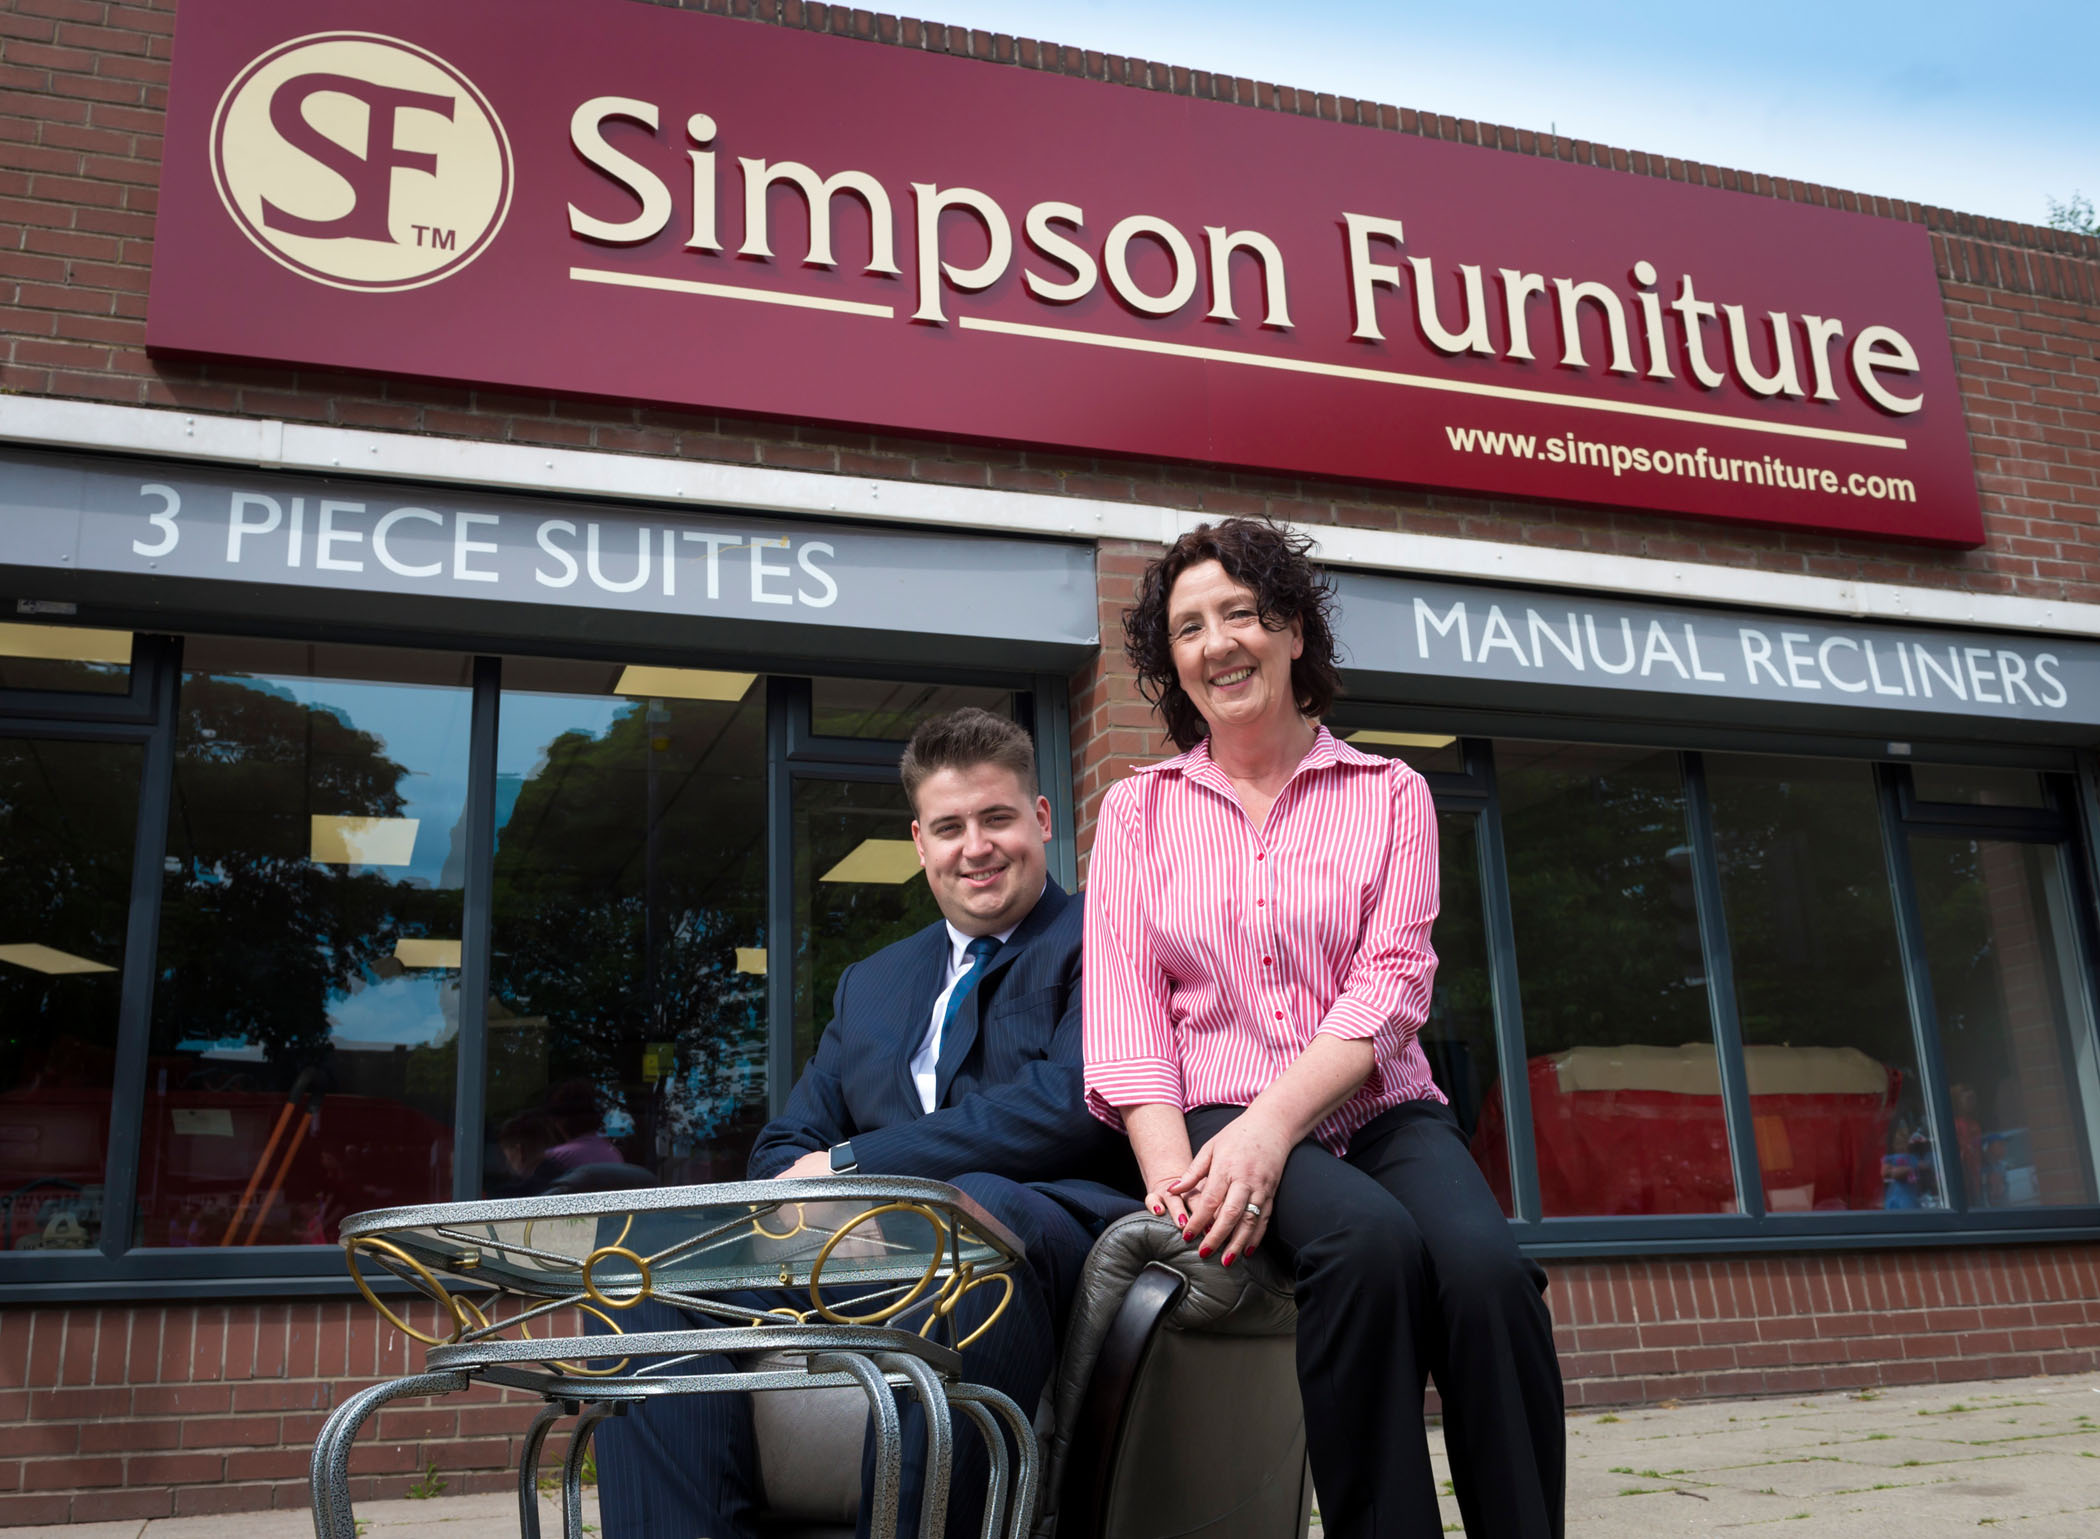 Image: Sitting pretty: new furniture store opens with council help